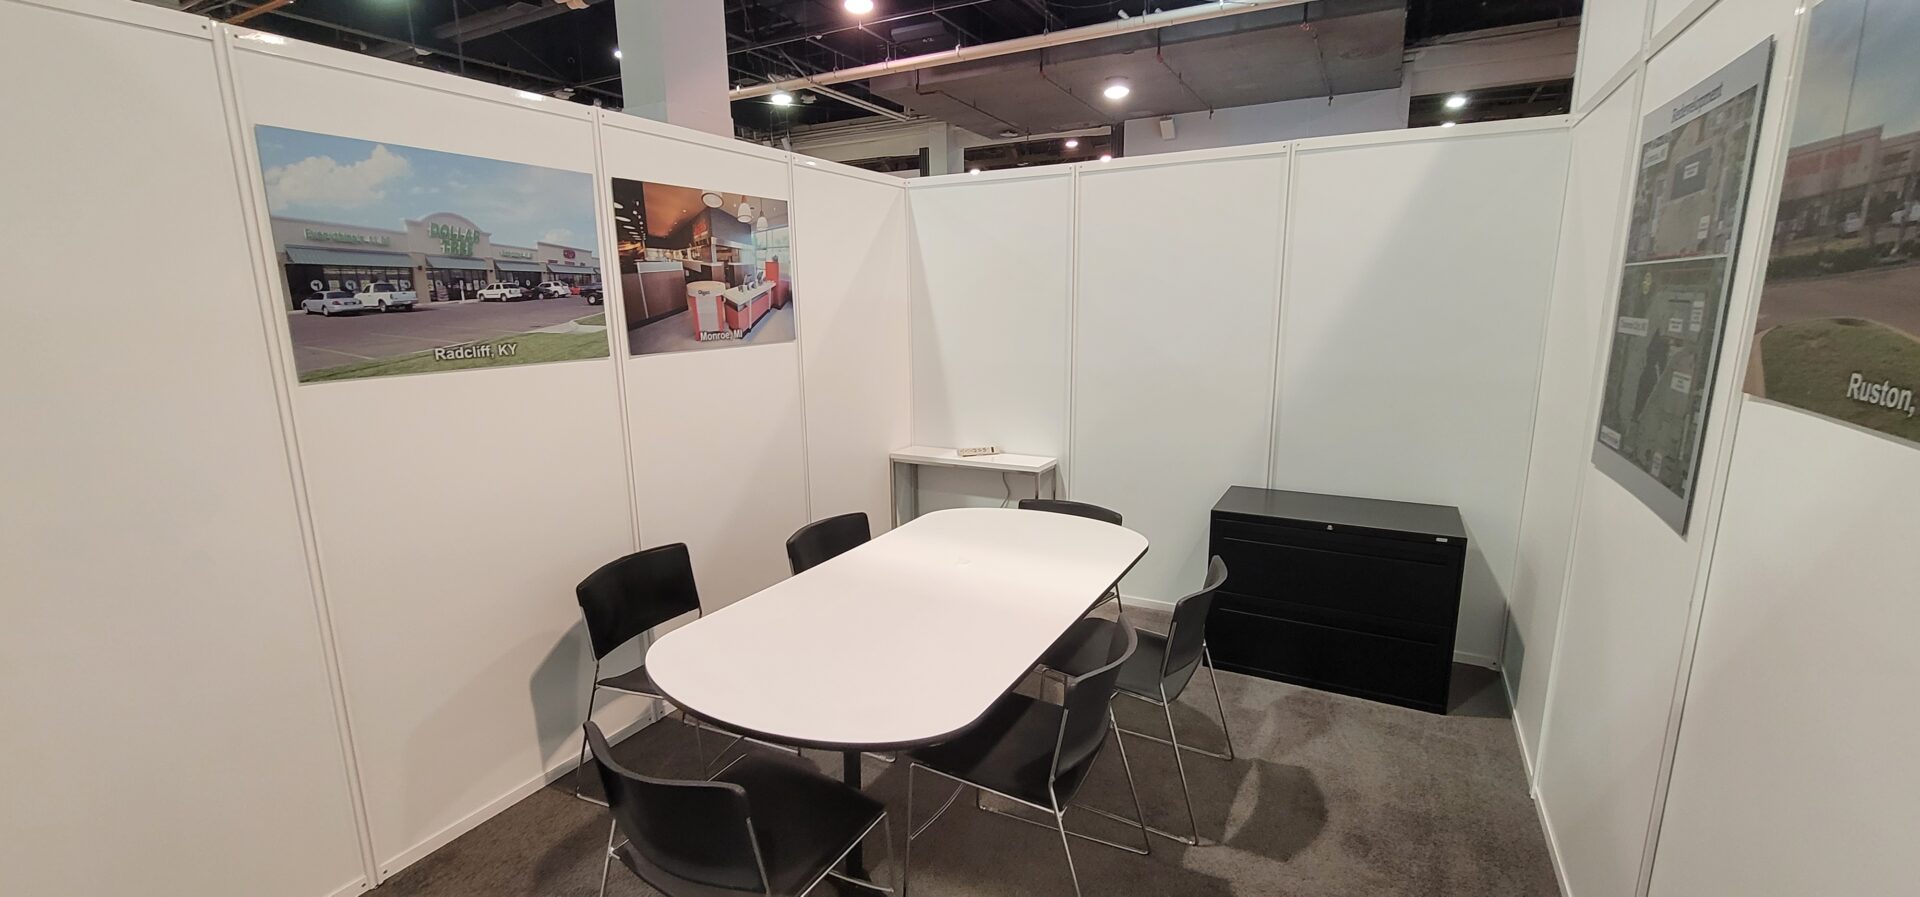 A white table with black chairs